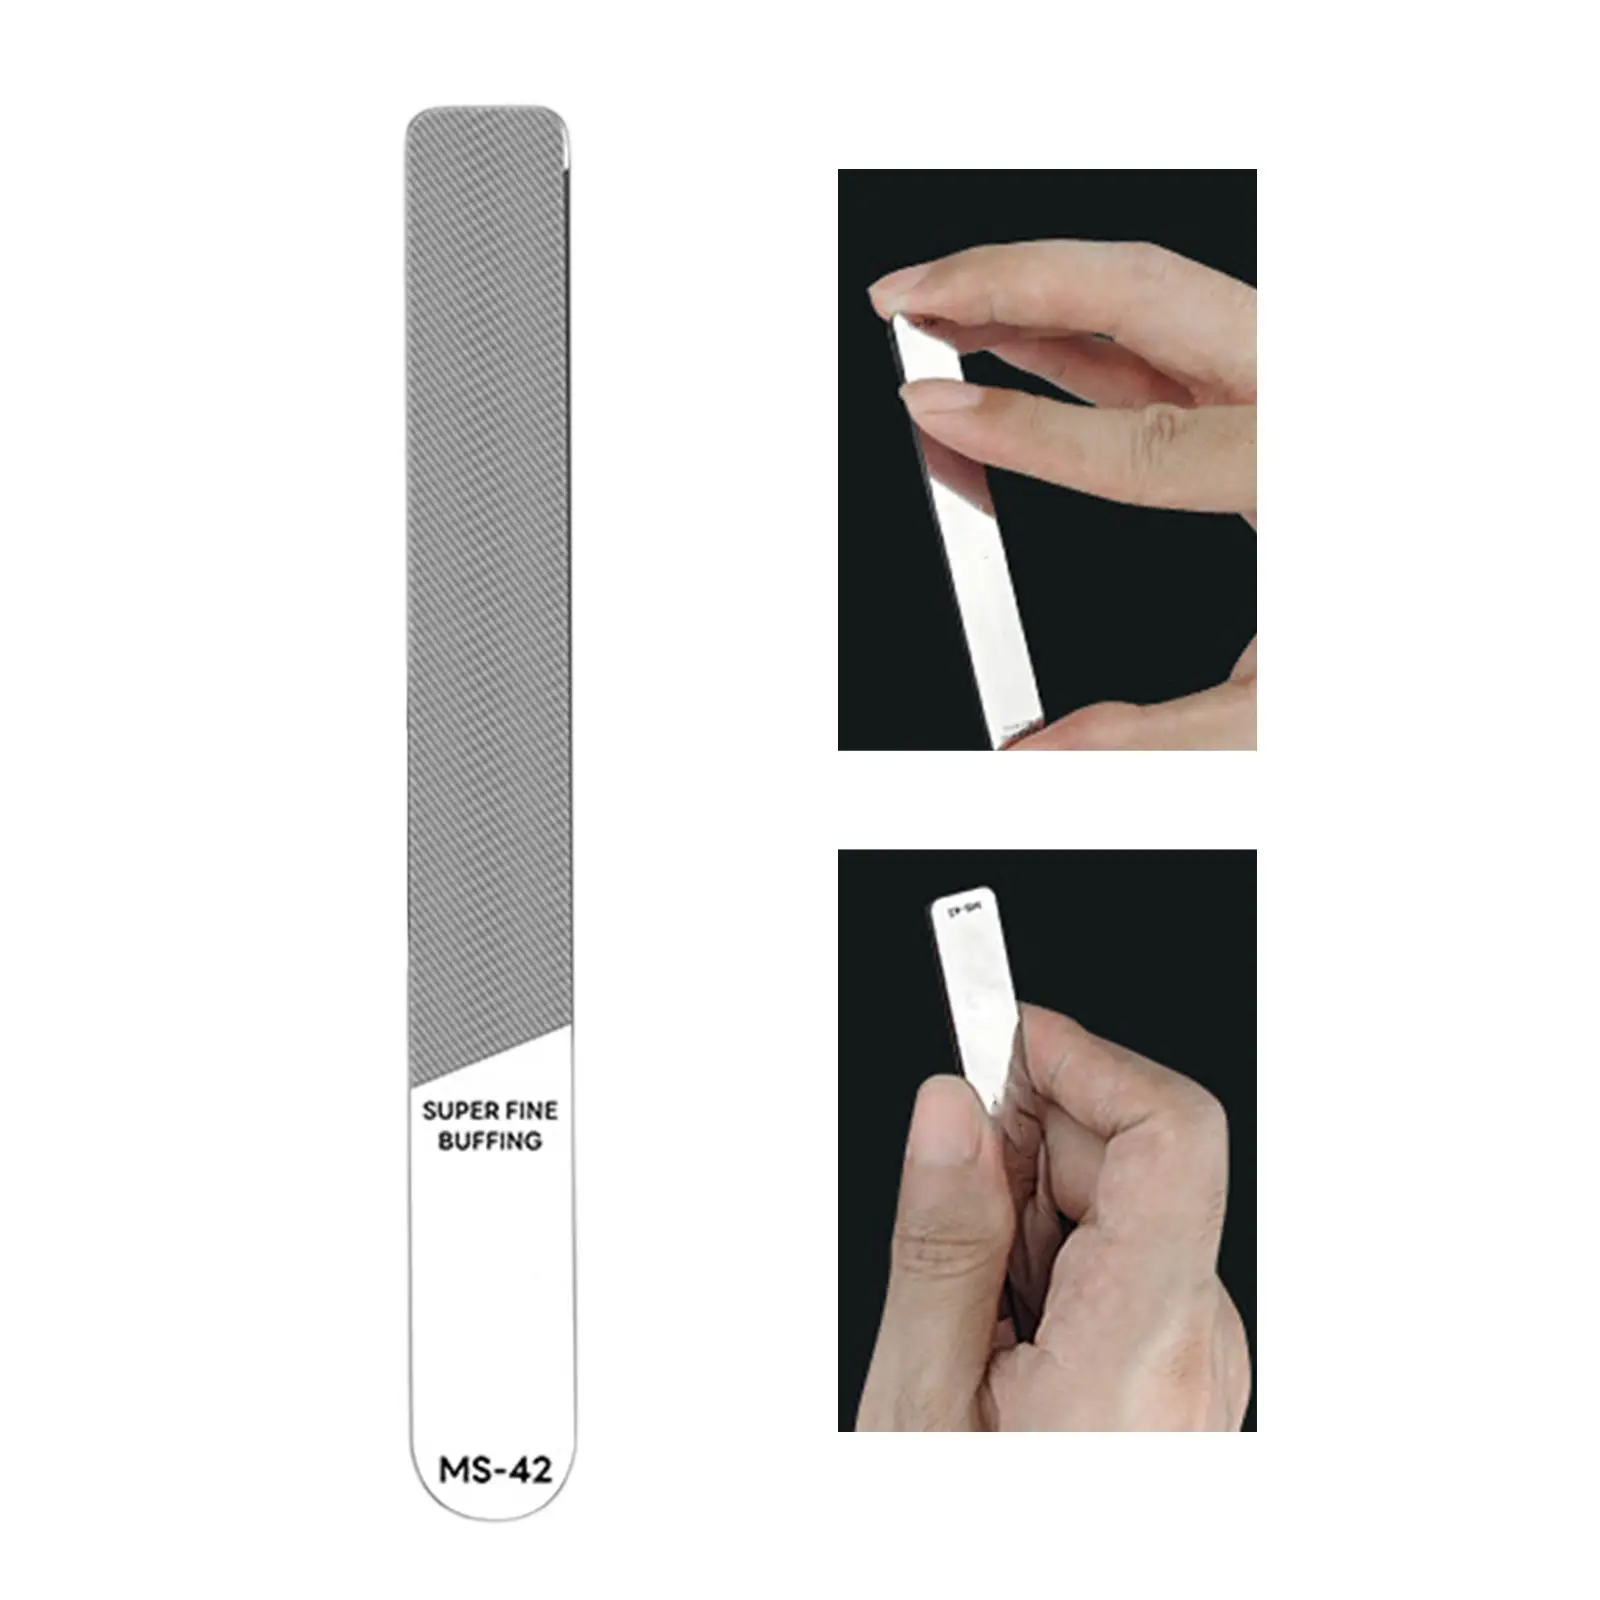 Glass File for Models Precision Universal Rustproof Metal File Grinding Tool for Plane Car Toy Figure Miniature Resin Material